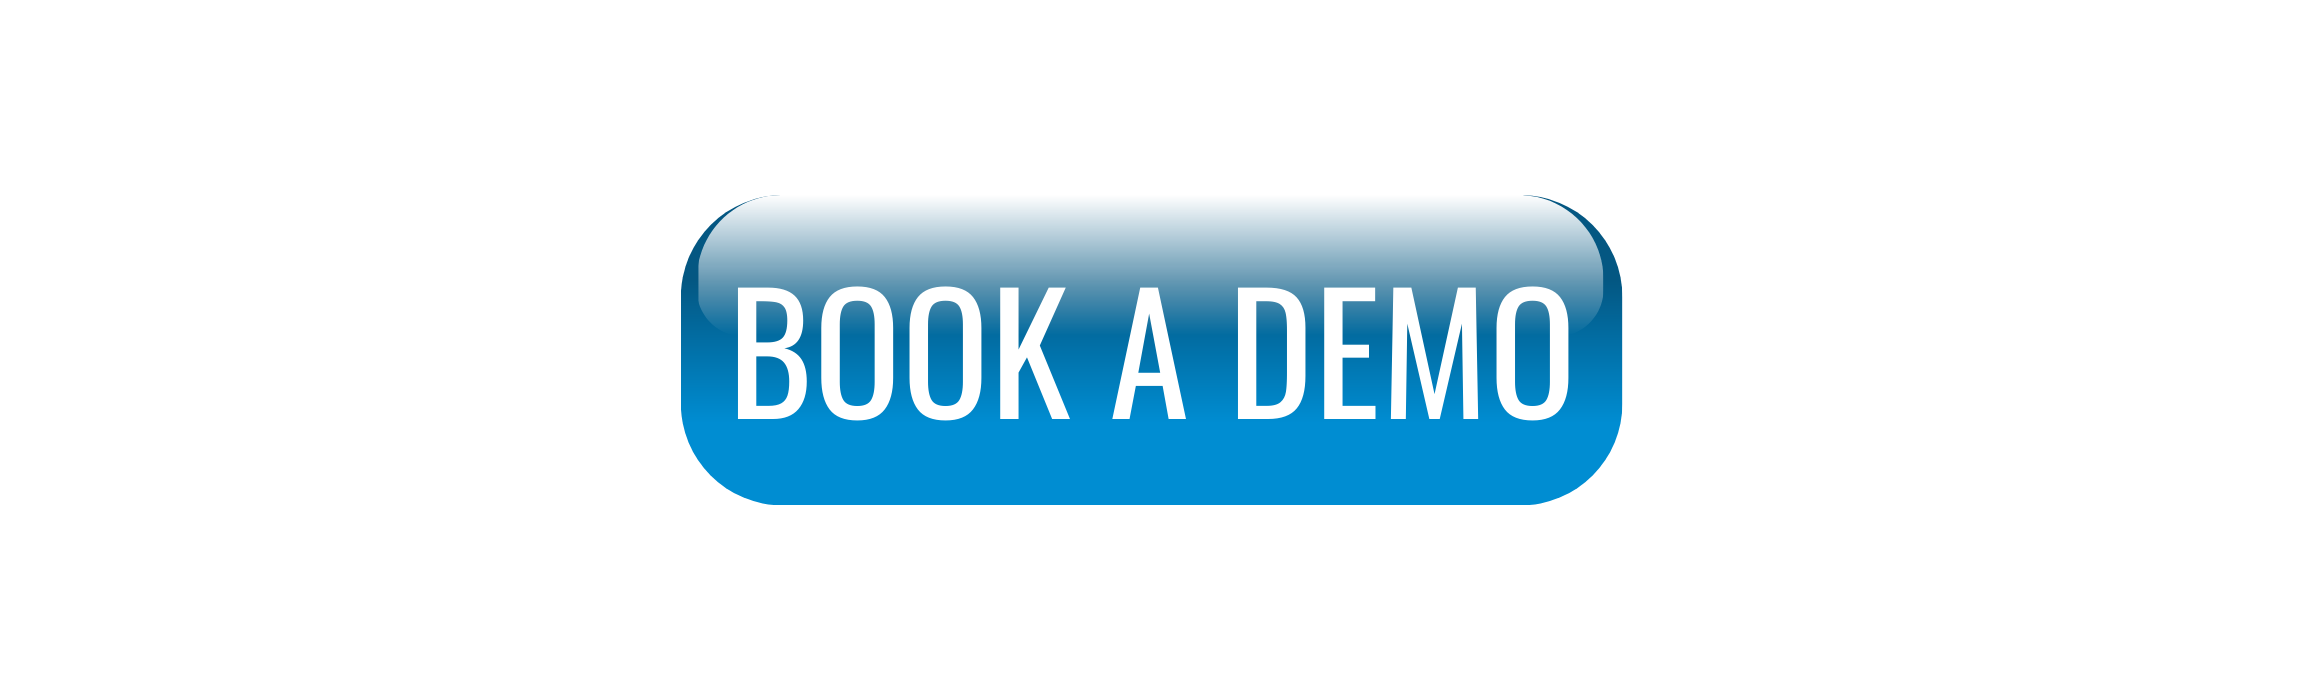 BOOK A DEMO (3).png